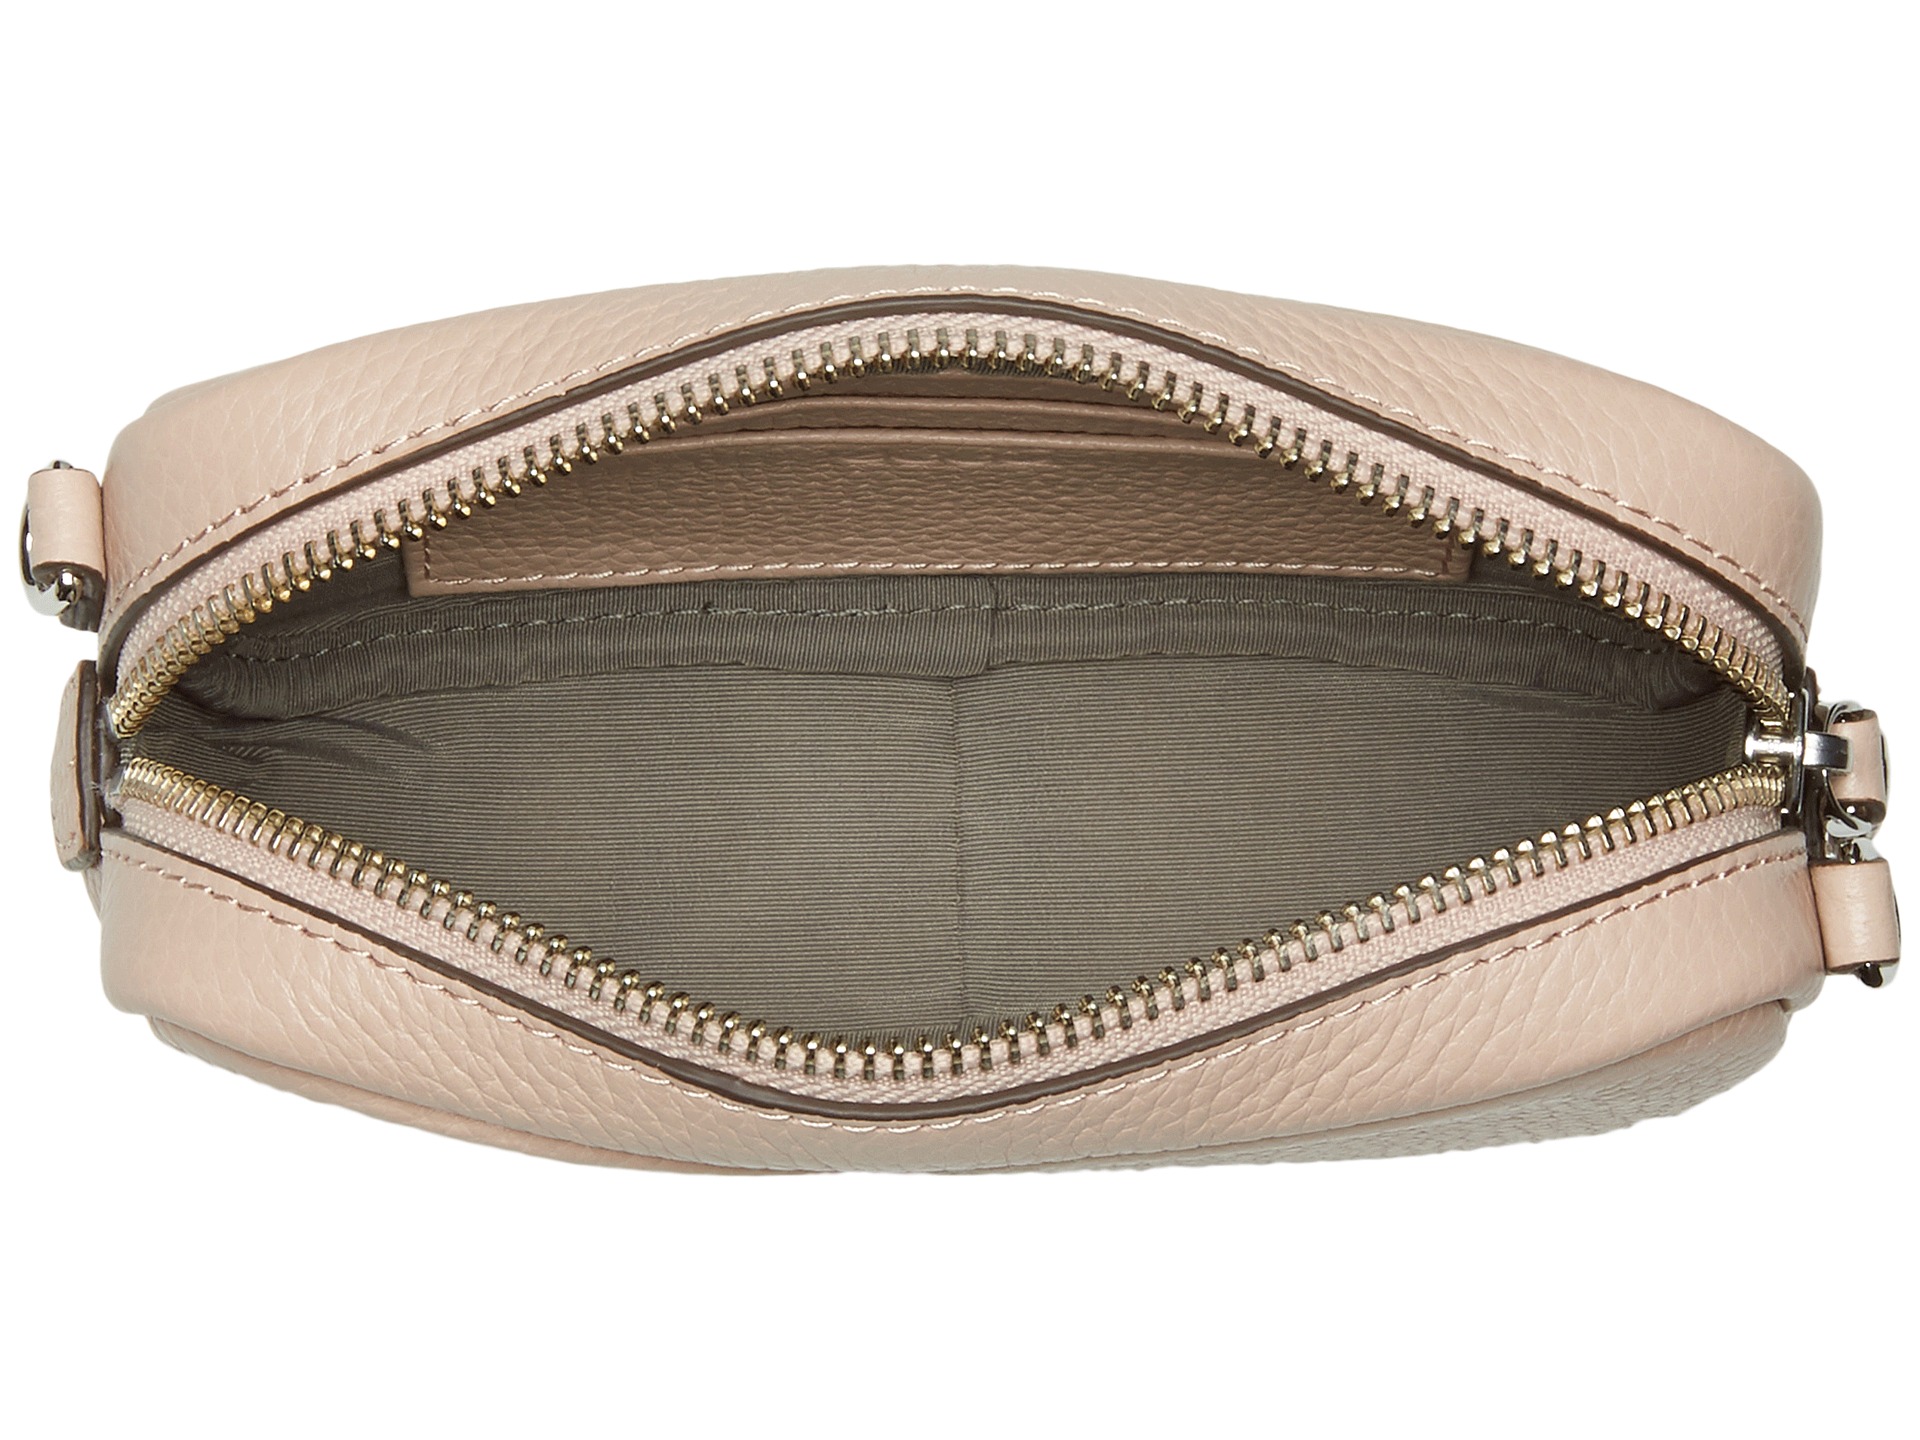 ECCO Isan Pouch w/ Strap Rose Dust - Zappos.com Free Shipping BOTH Ways